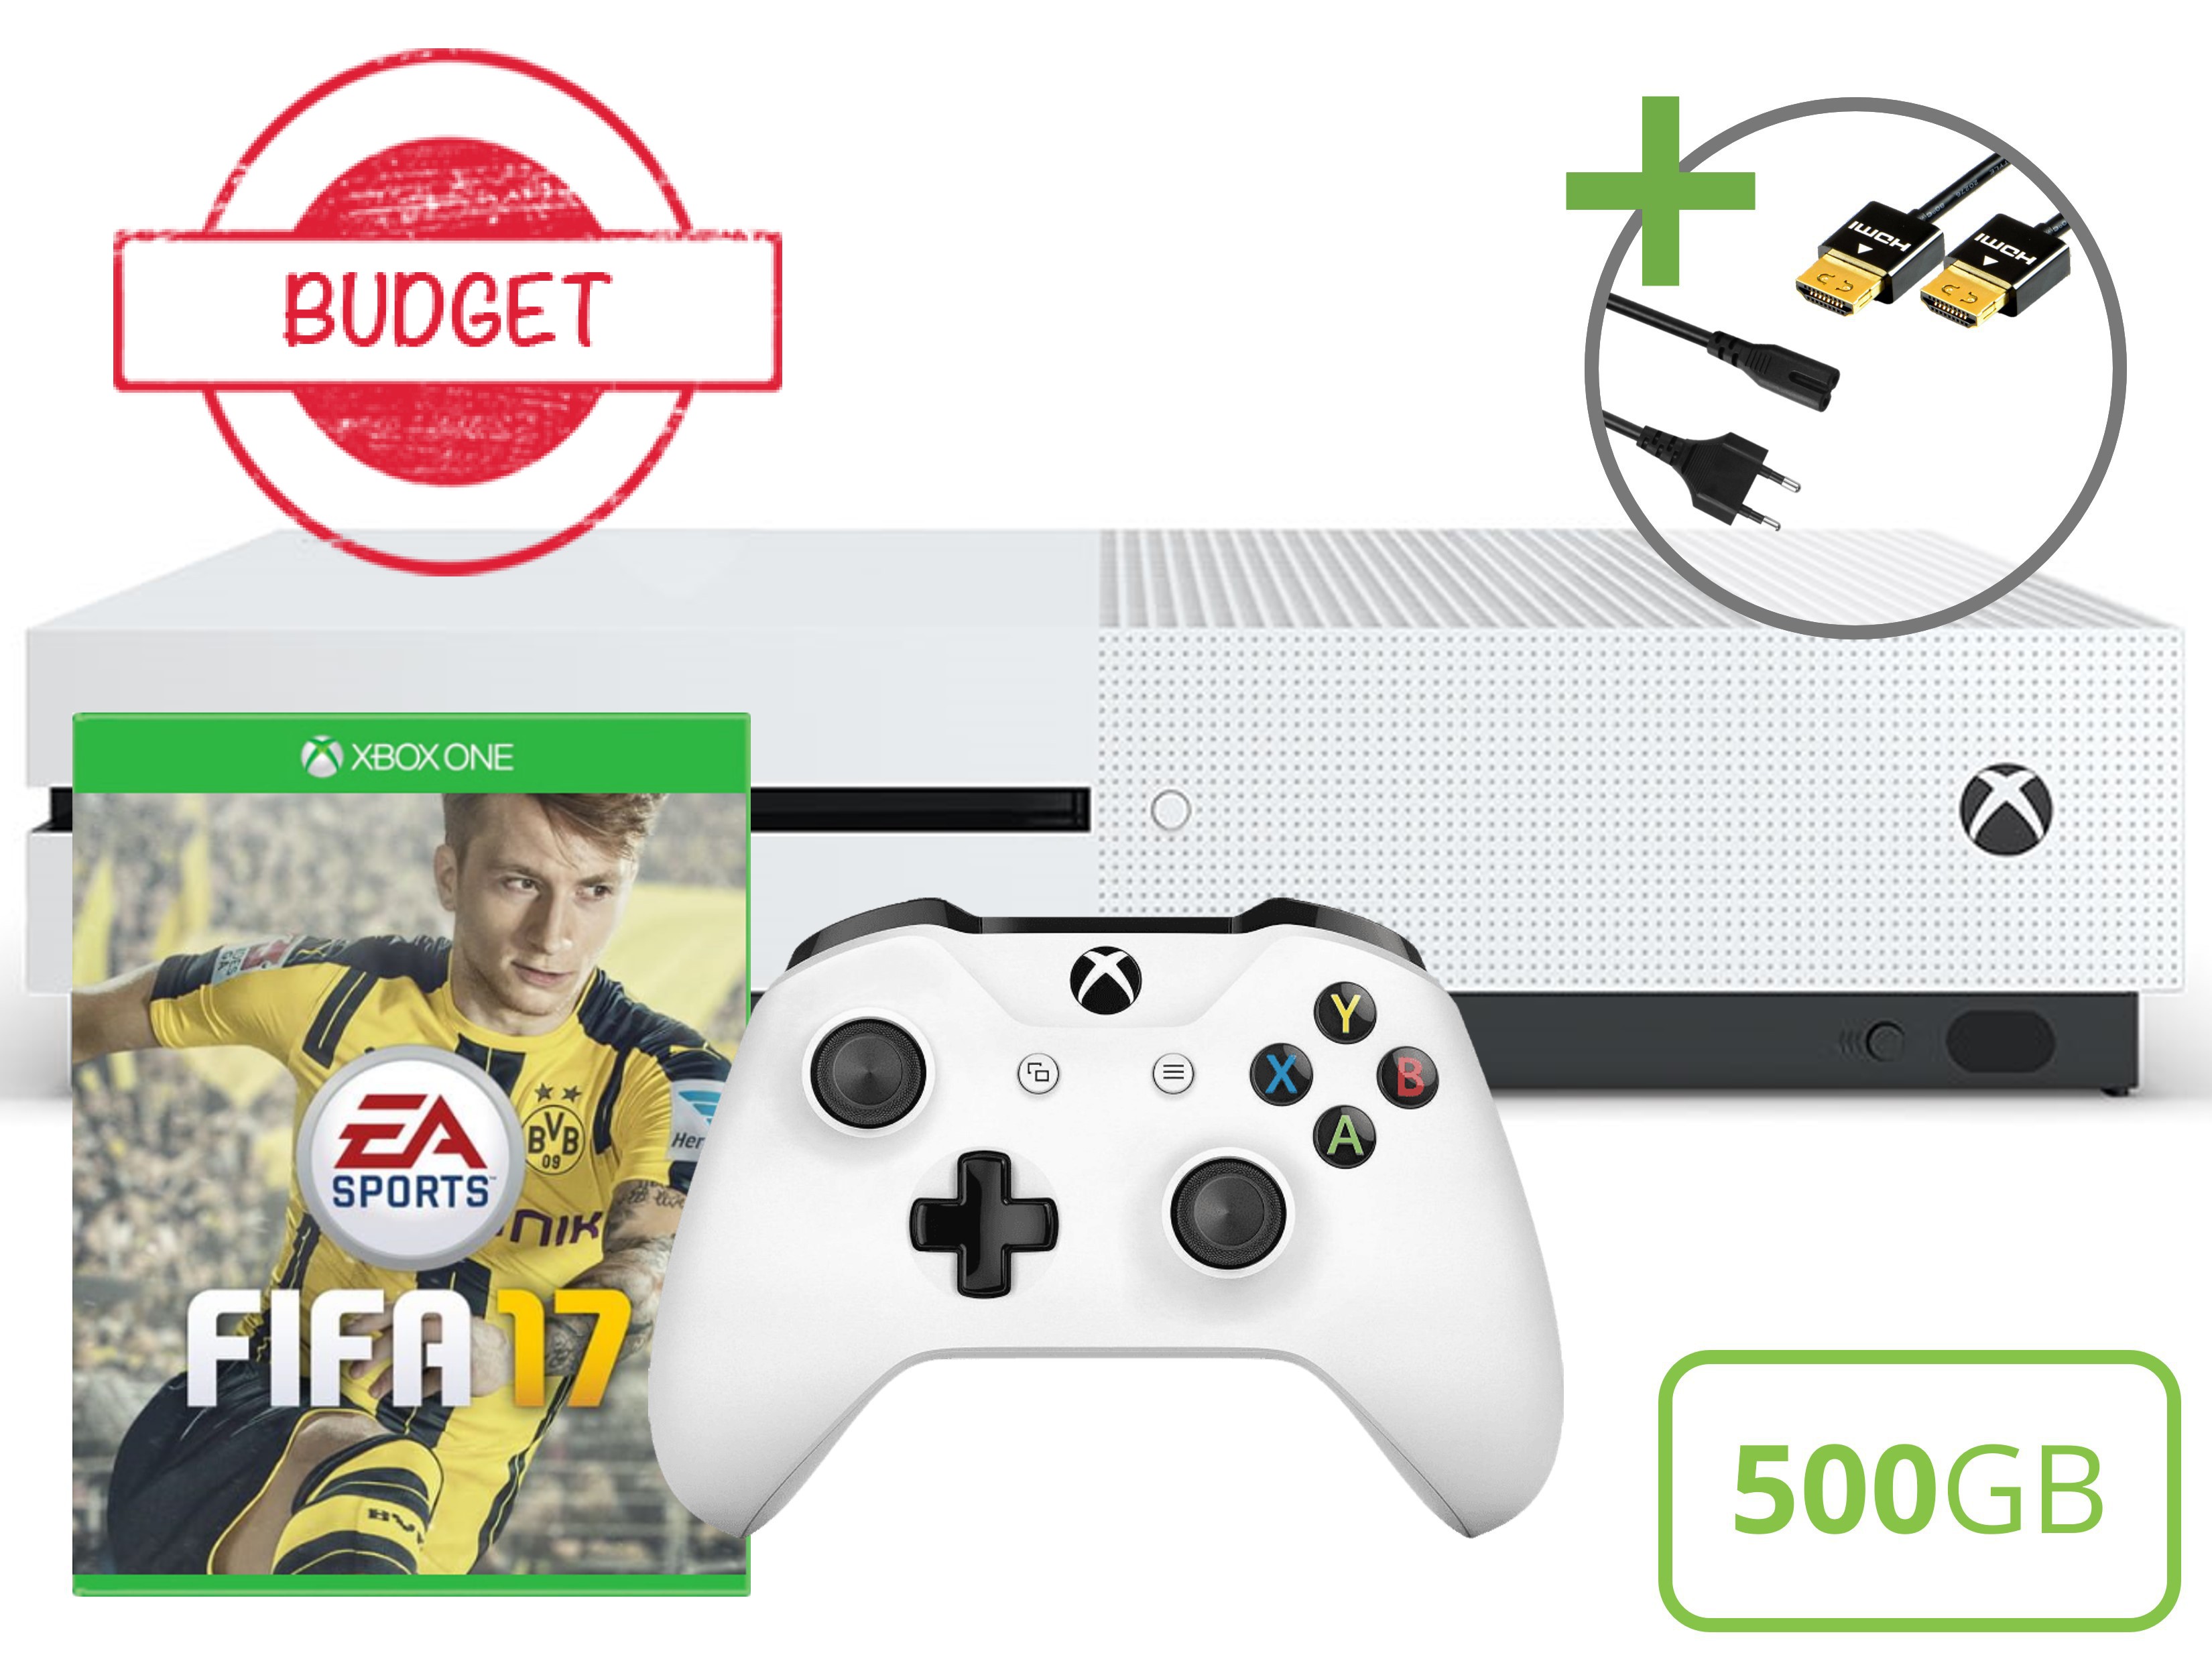 Microsoft Xbox One S Starter Pack - 500GB FIFA 17 Edition - Budget - Xbox One Hardware